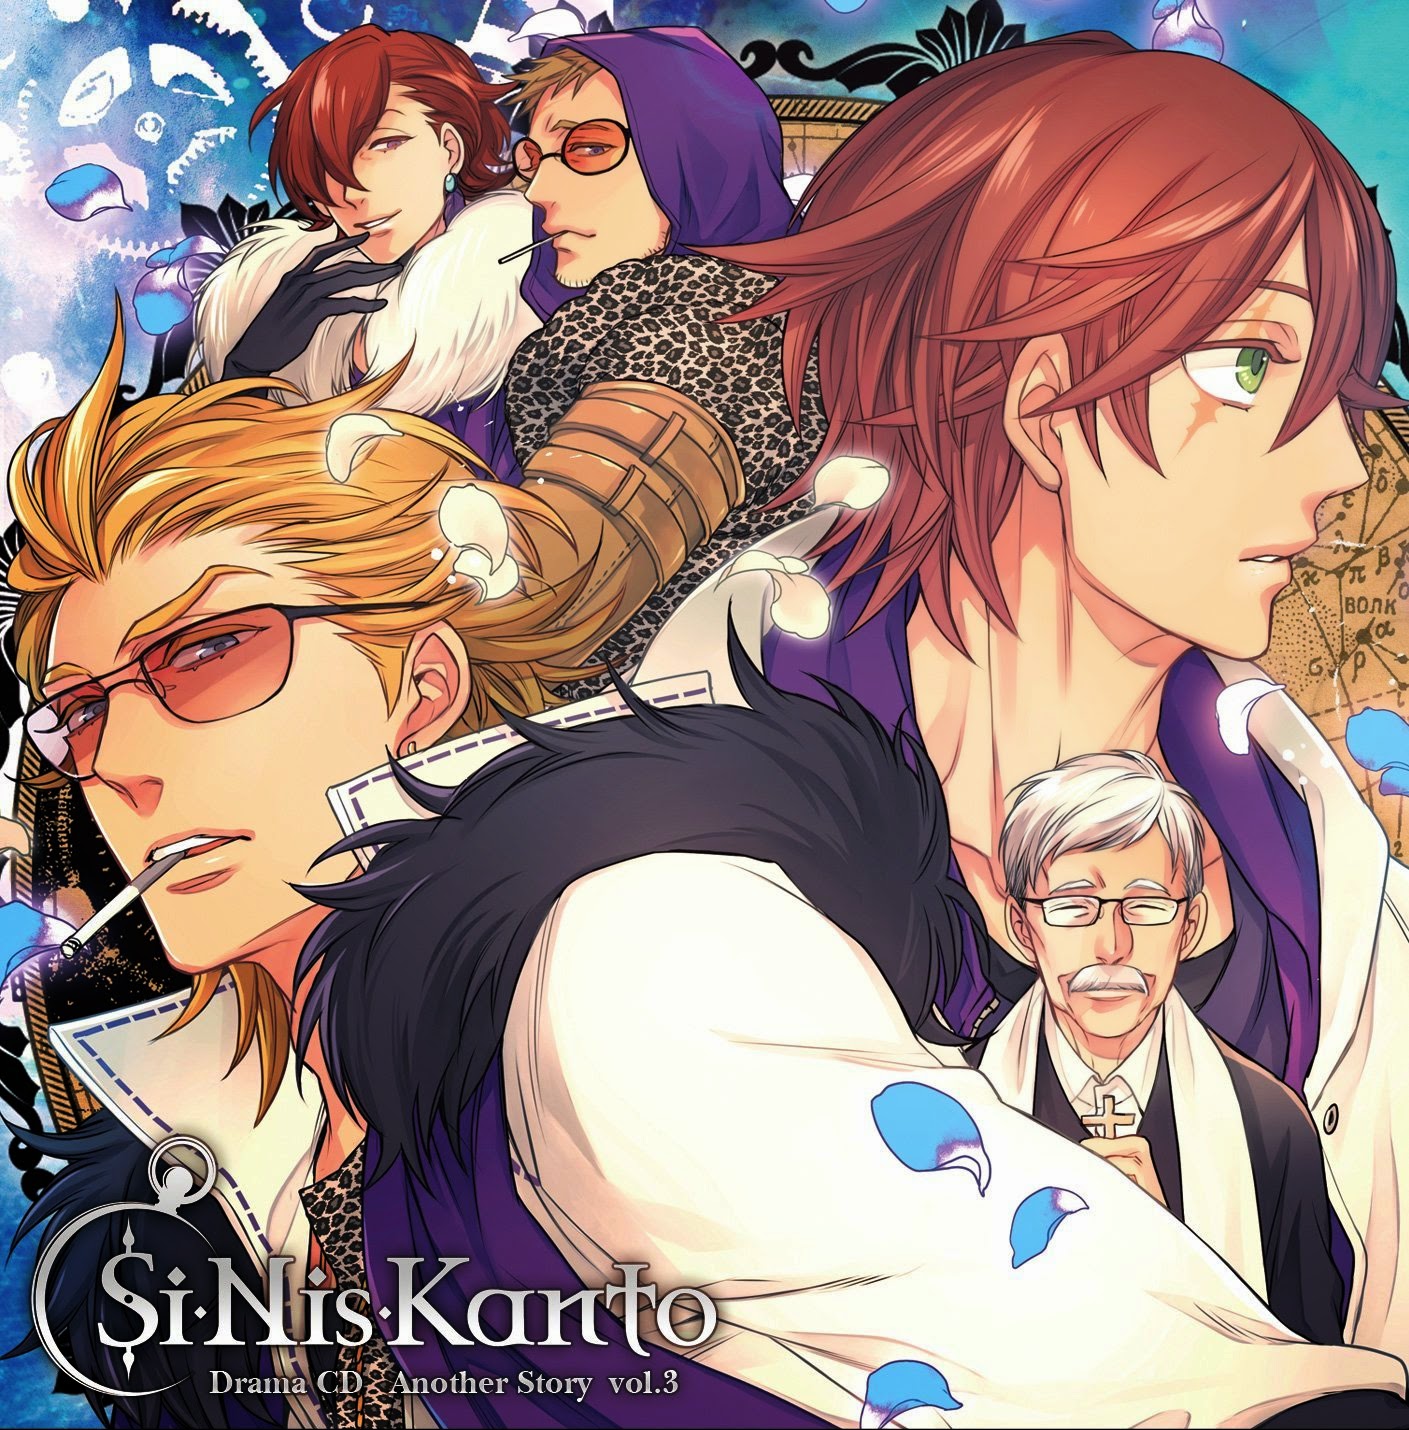 Si-Nis-Kanto Drama CD Another Story Vol.3.